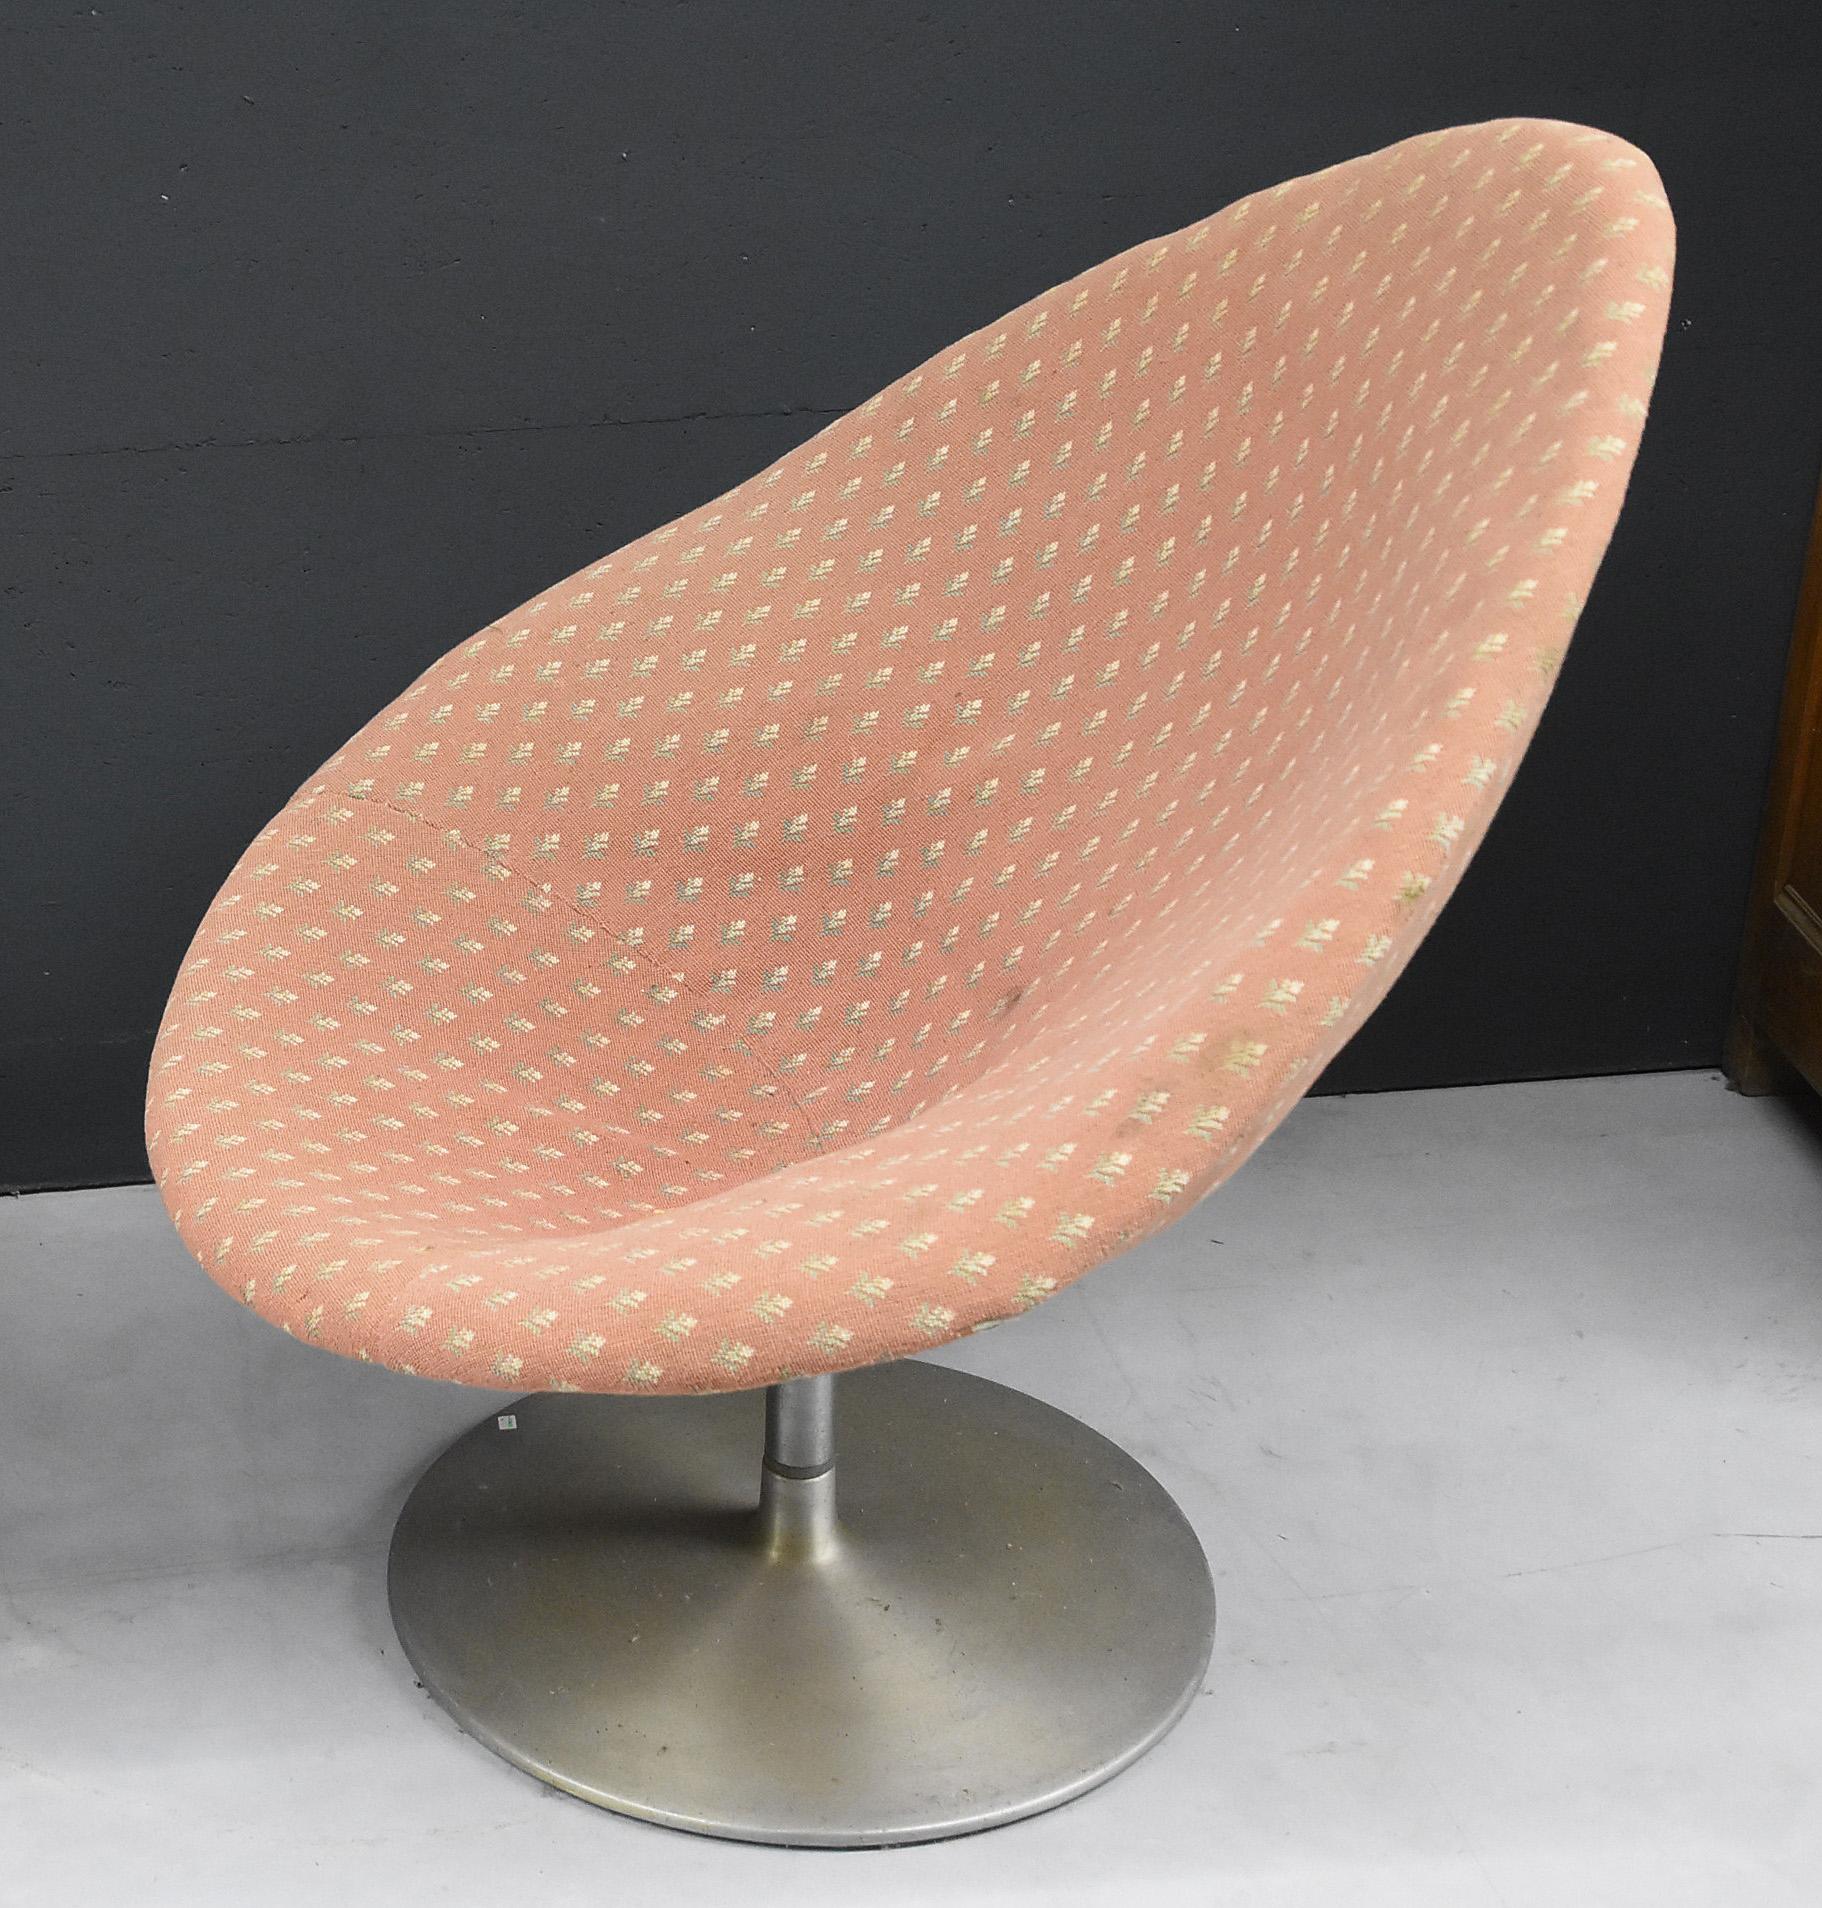 Pierre Paulin, globe seat F 422 and its ottoman in steel and fabric, circa 1960
Artifort Edition.